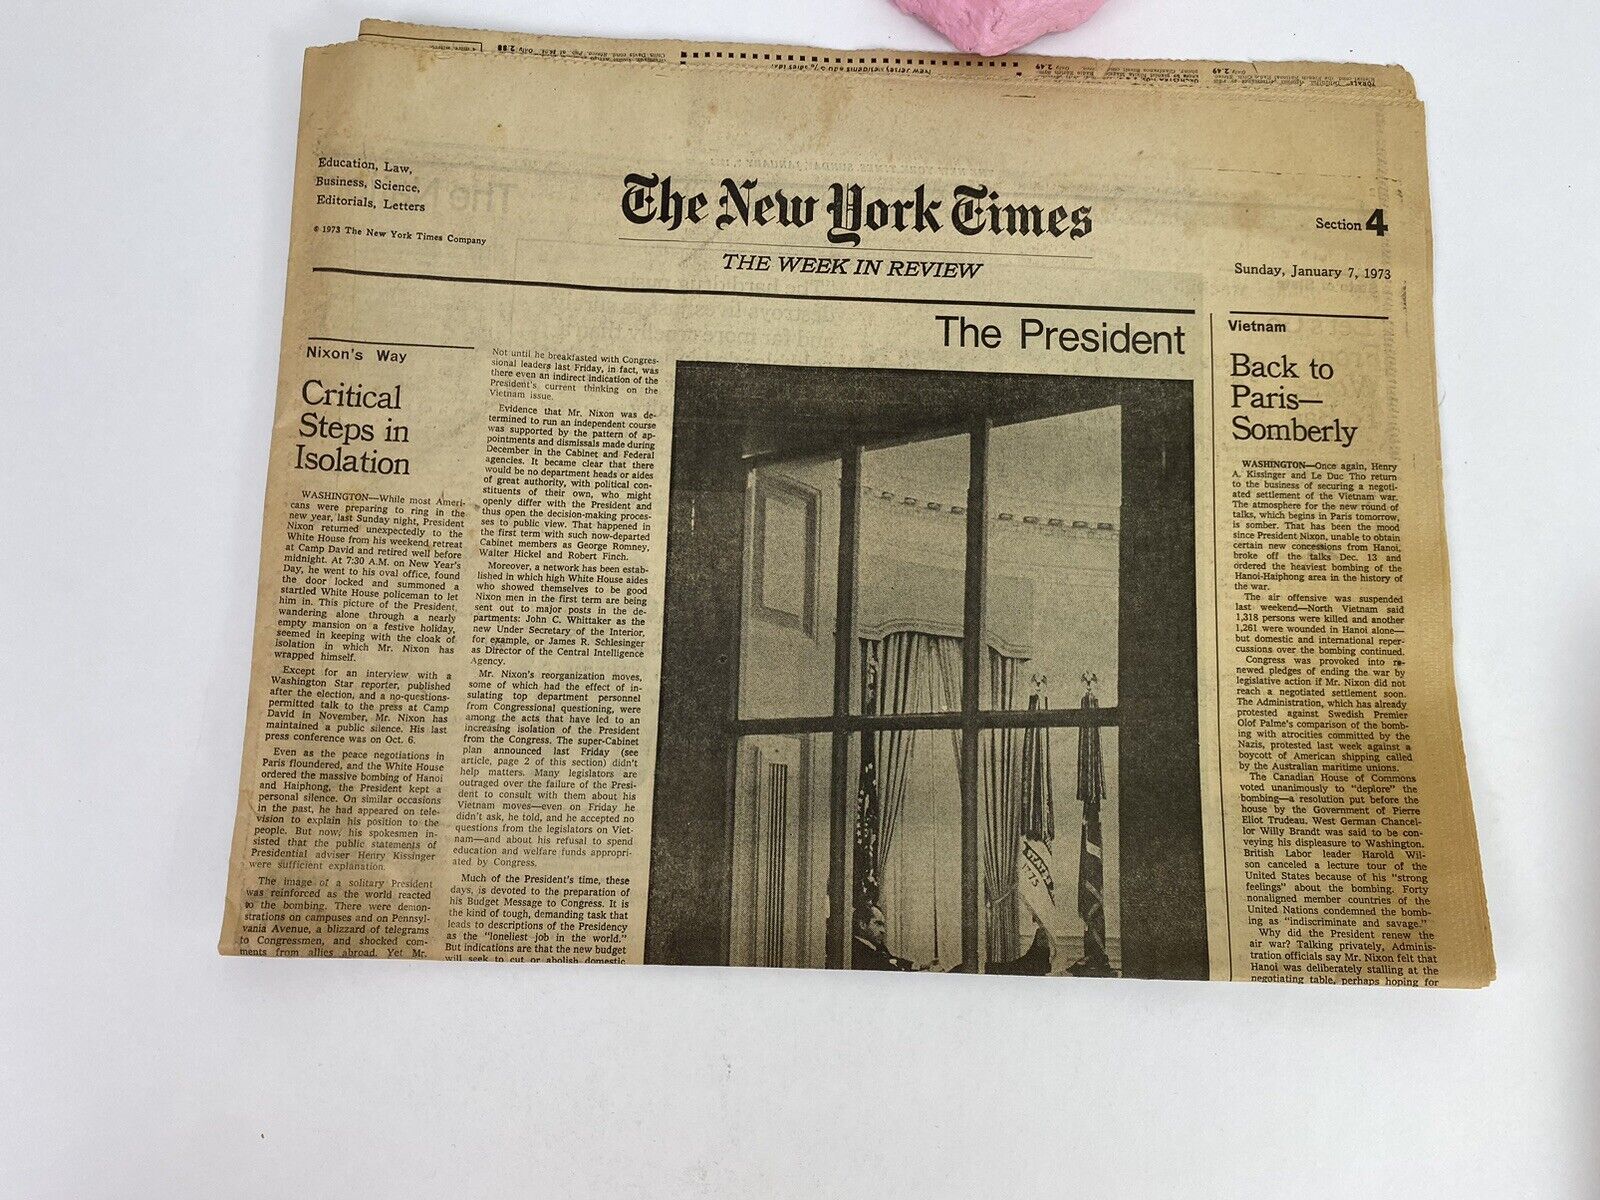 1973 The New York Times: This Week in Review Jan 7 - The President (Nixon) The C